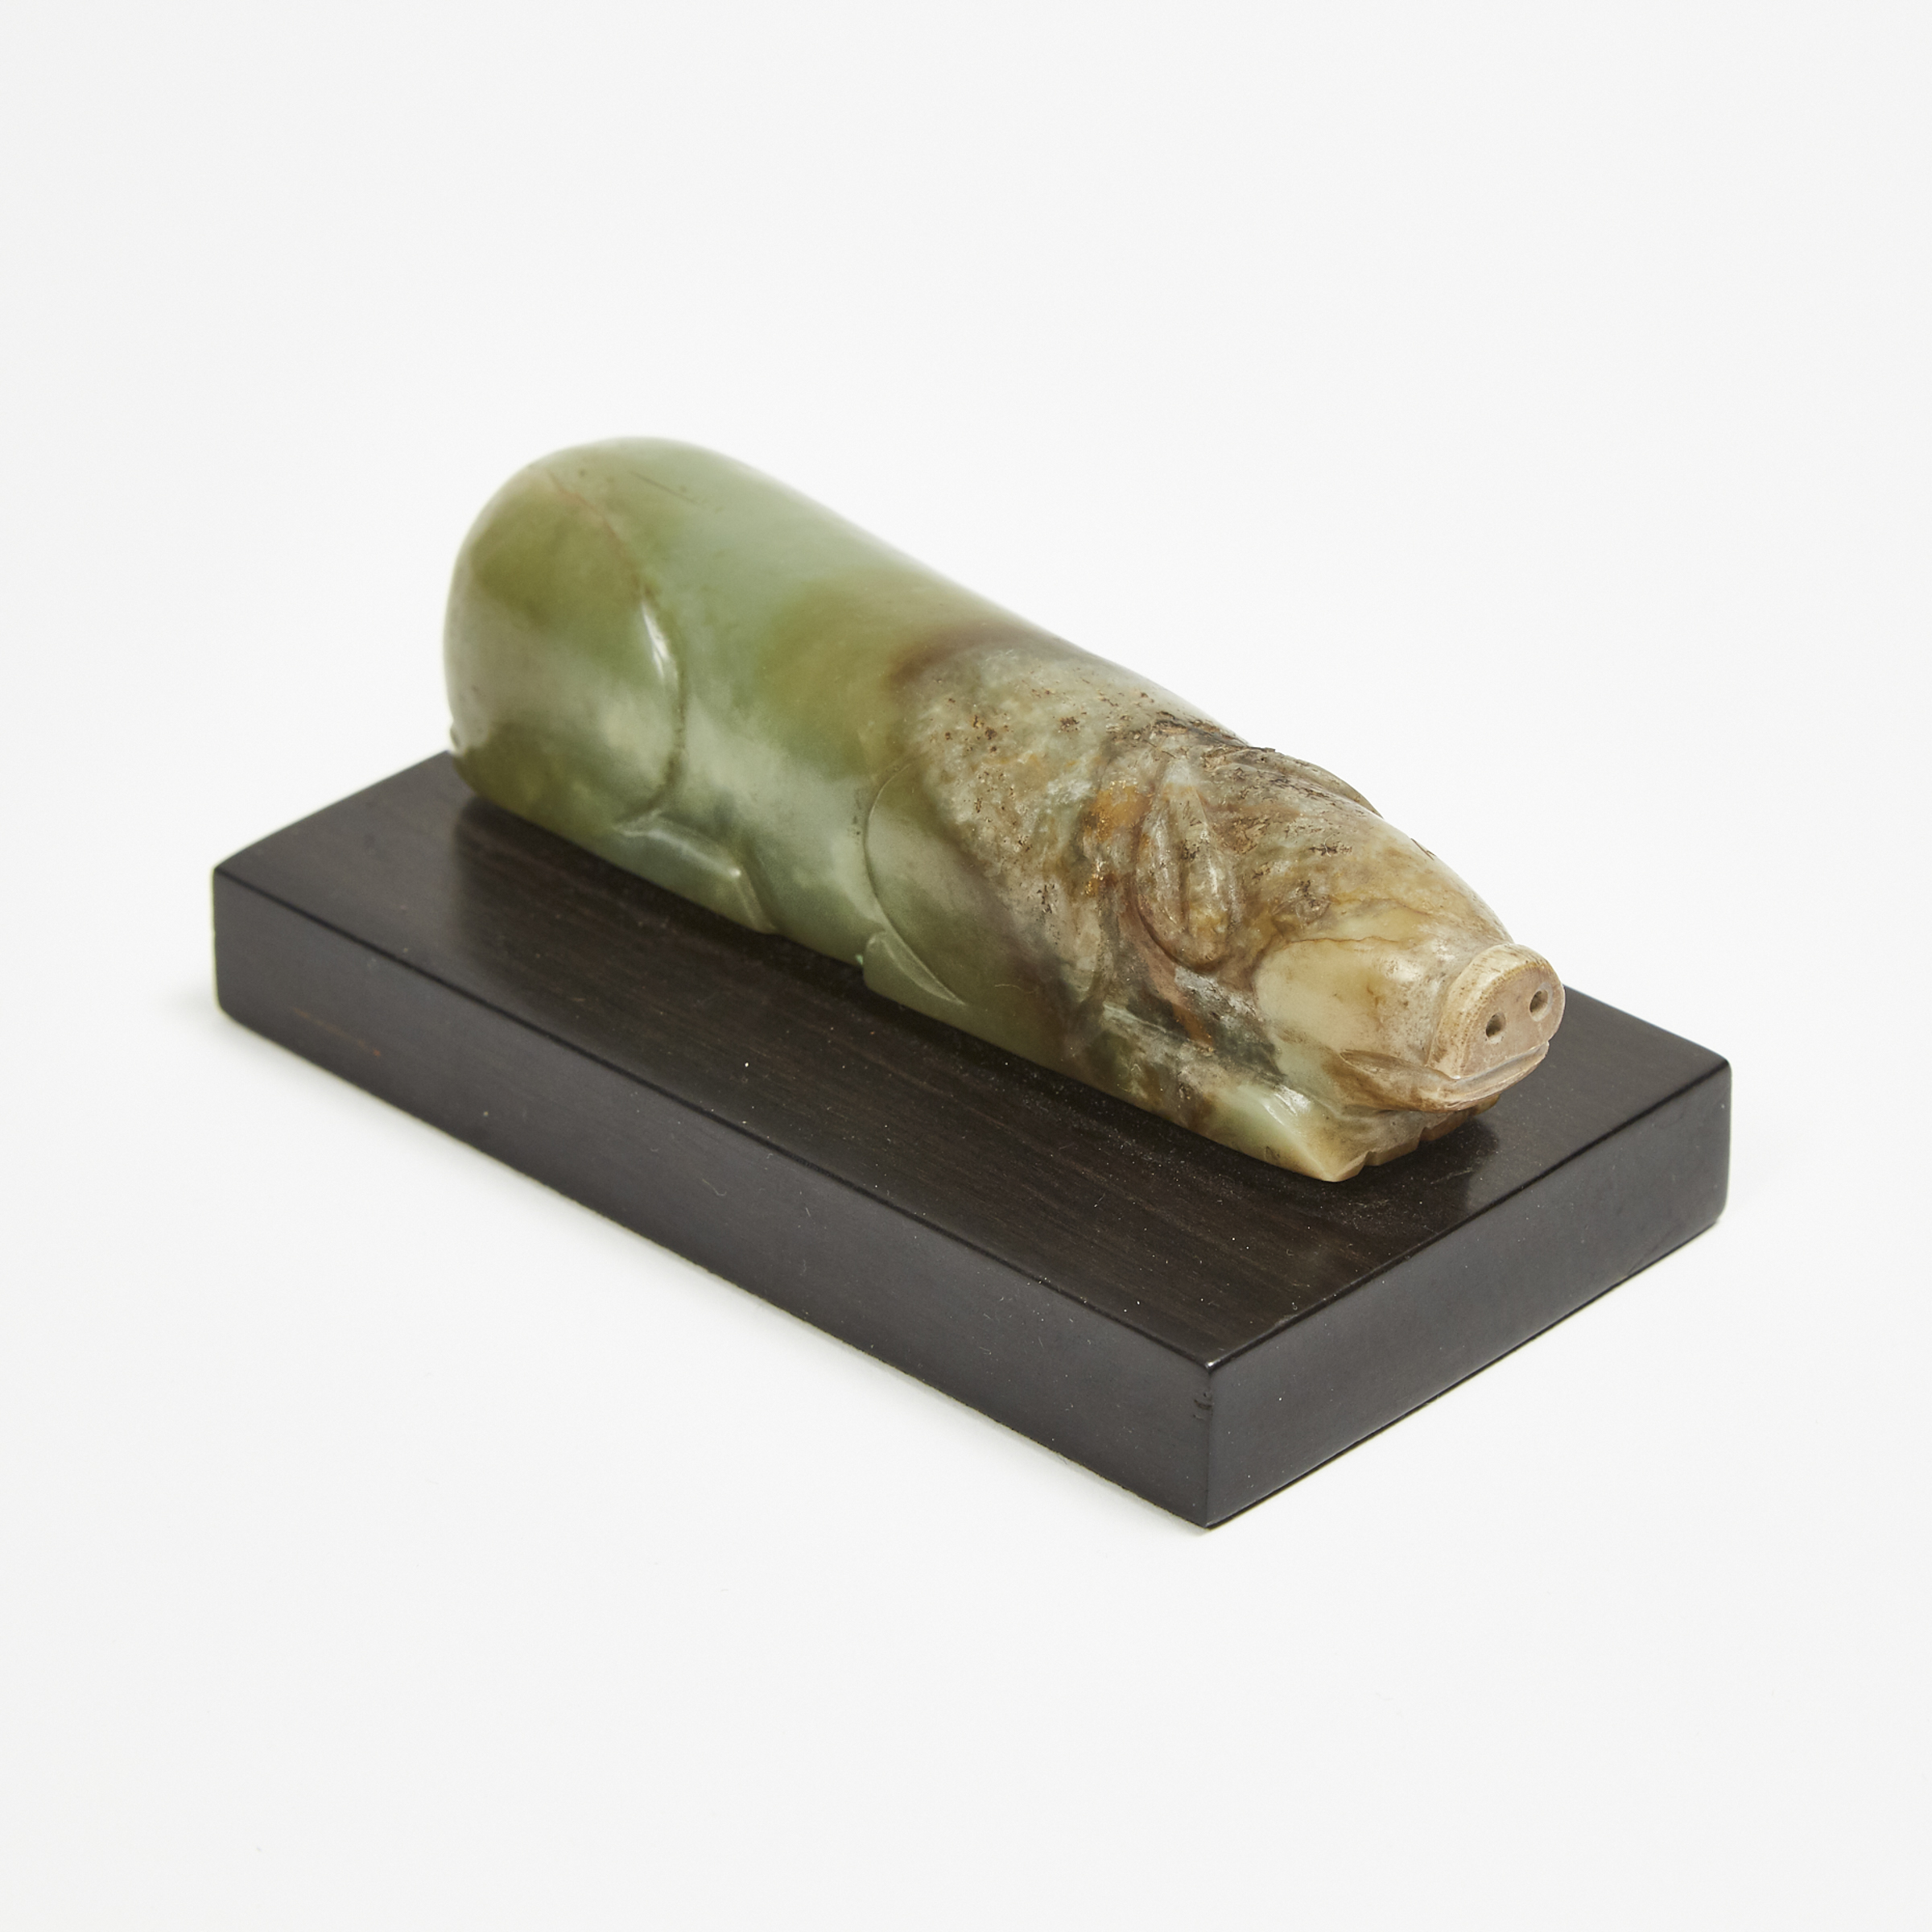 A Green Jade Carving of a Pig, Possibly Han Dynasty